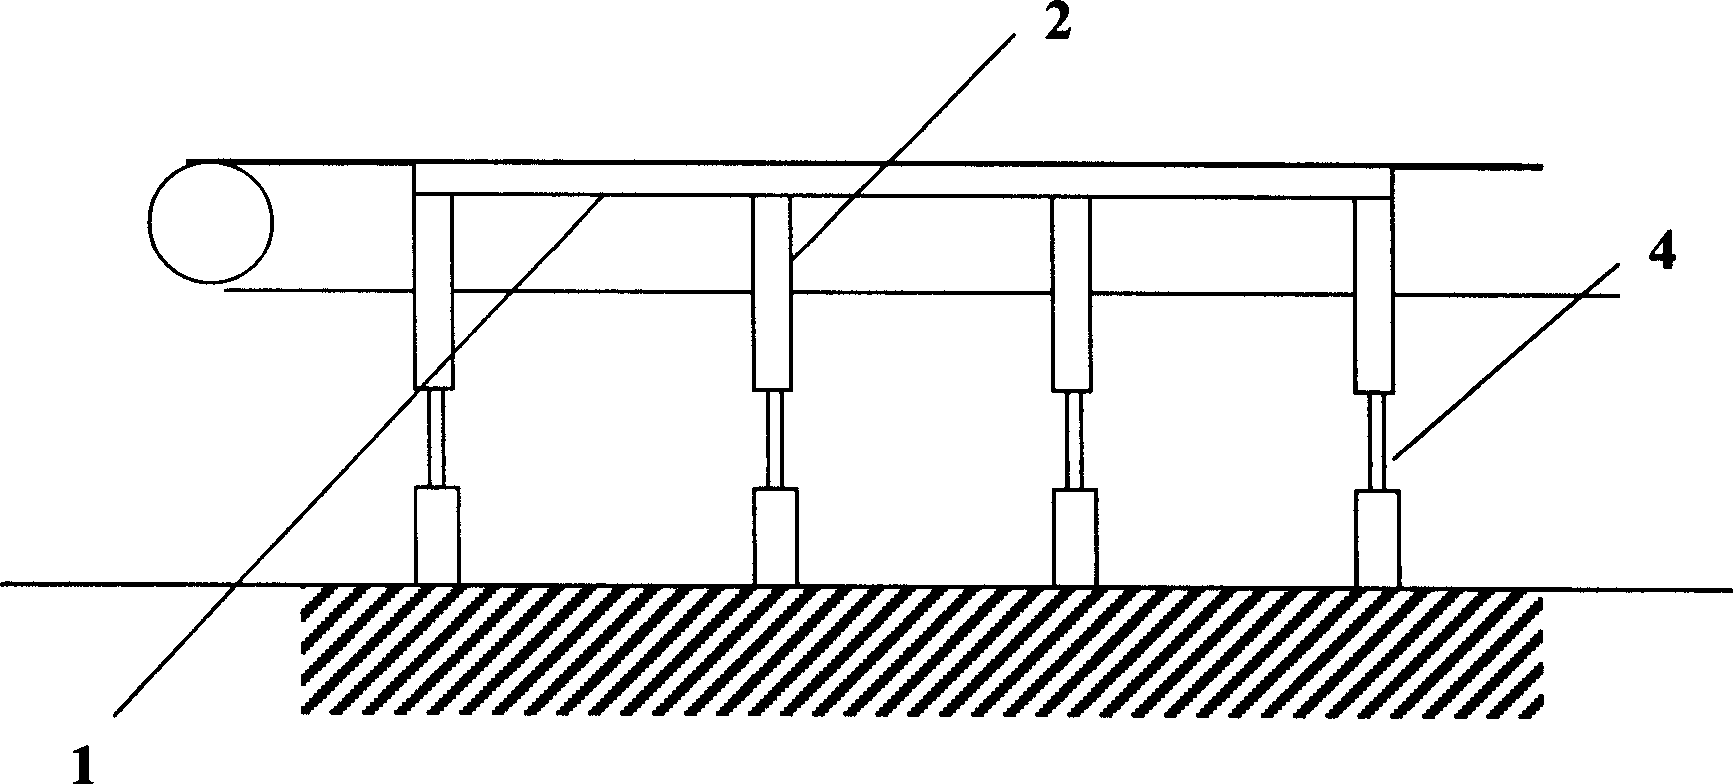 Supporting device for receiving hopper operation of conveyer belt